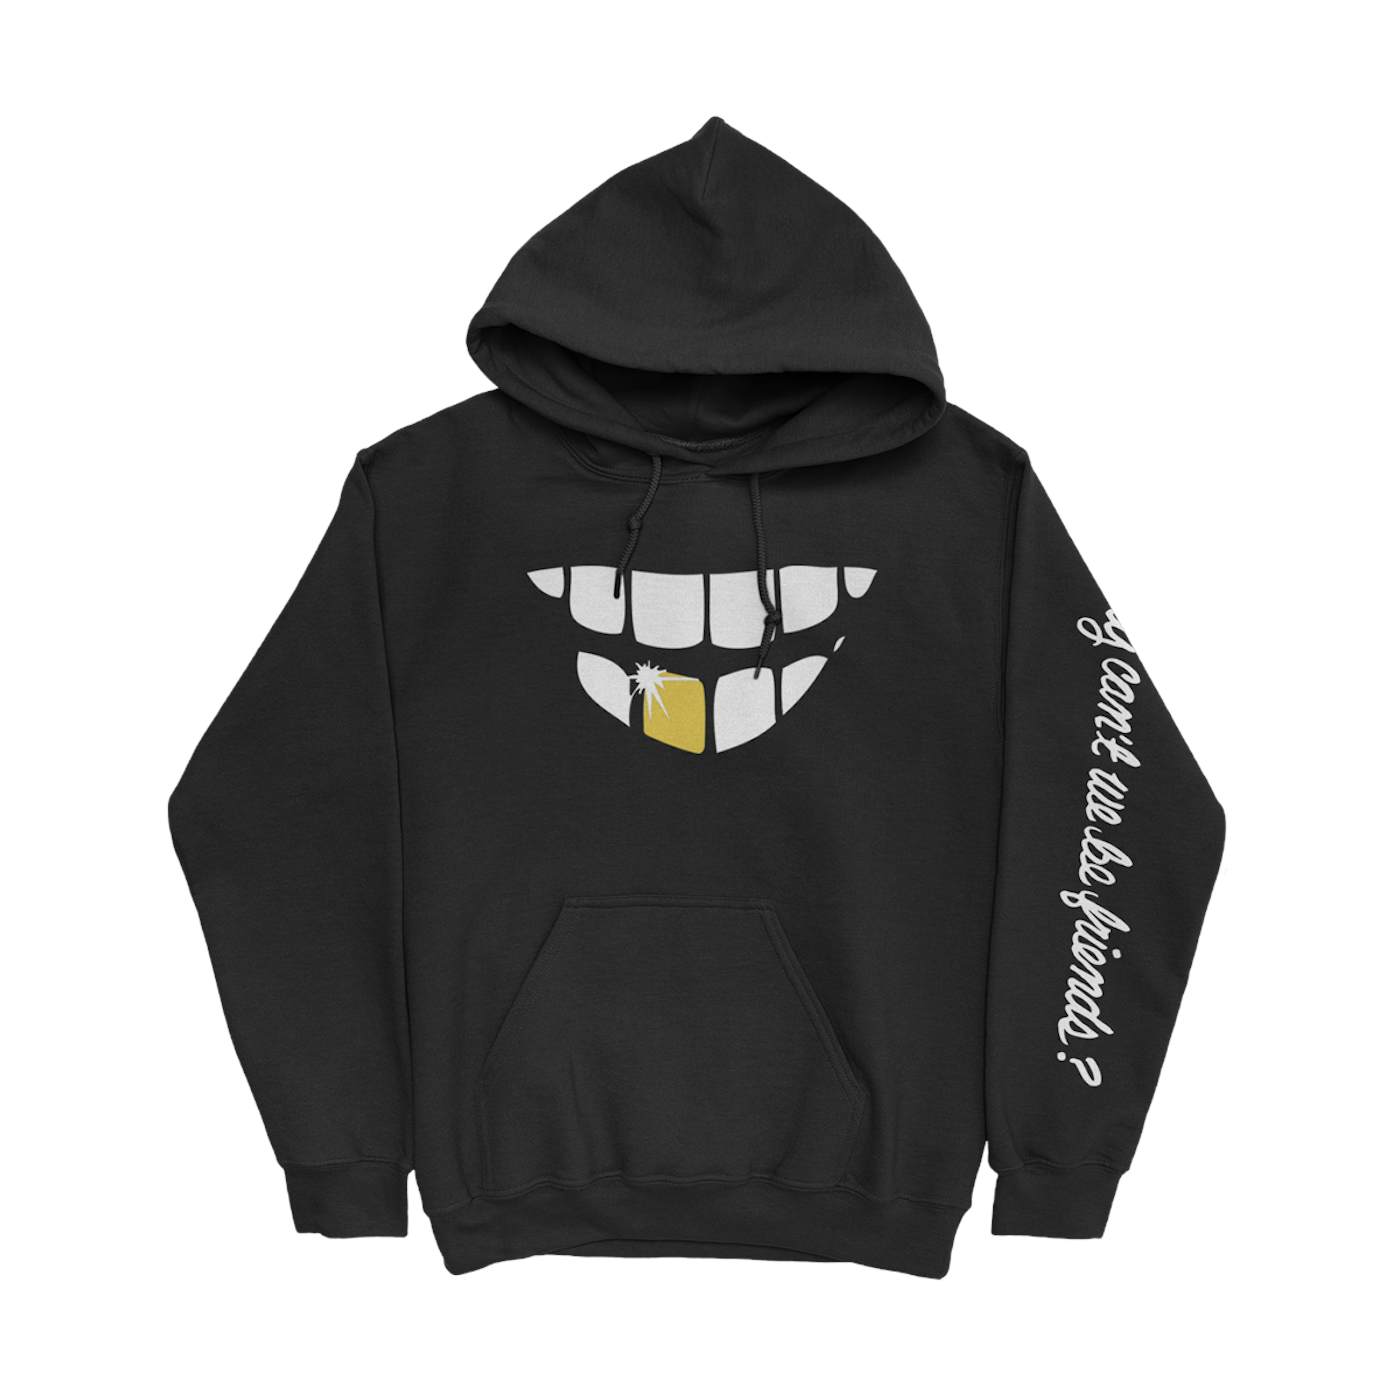 War Why Can’t We? Hoodie